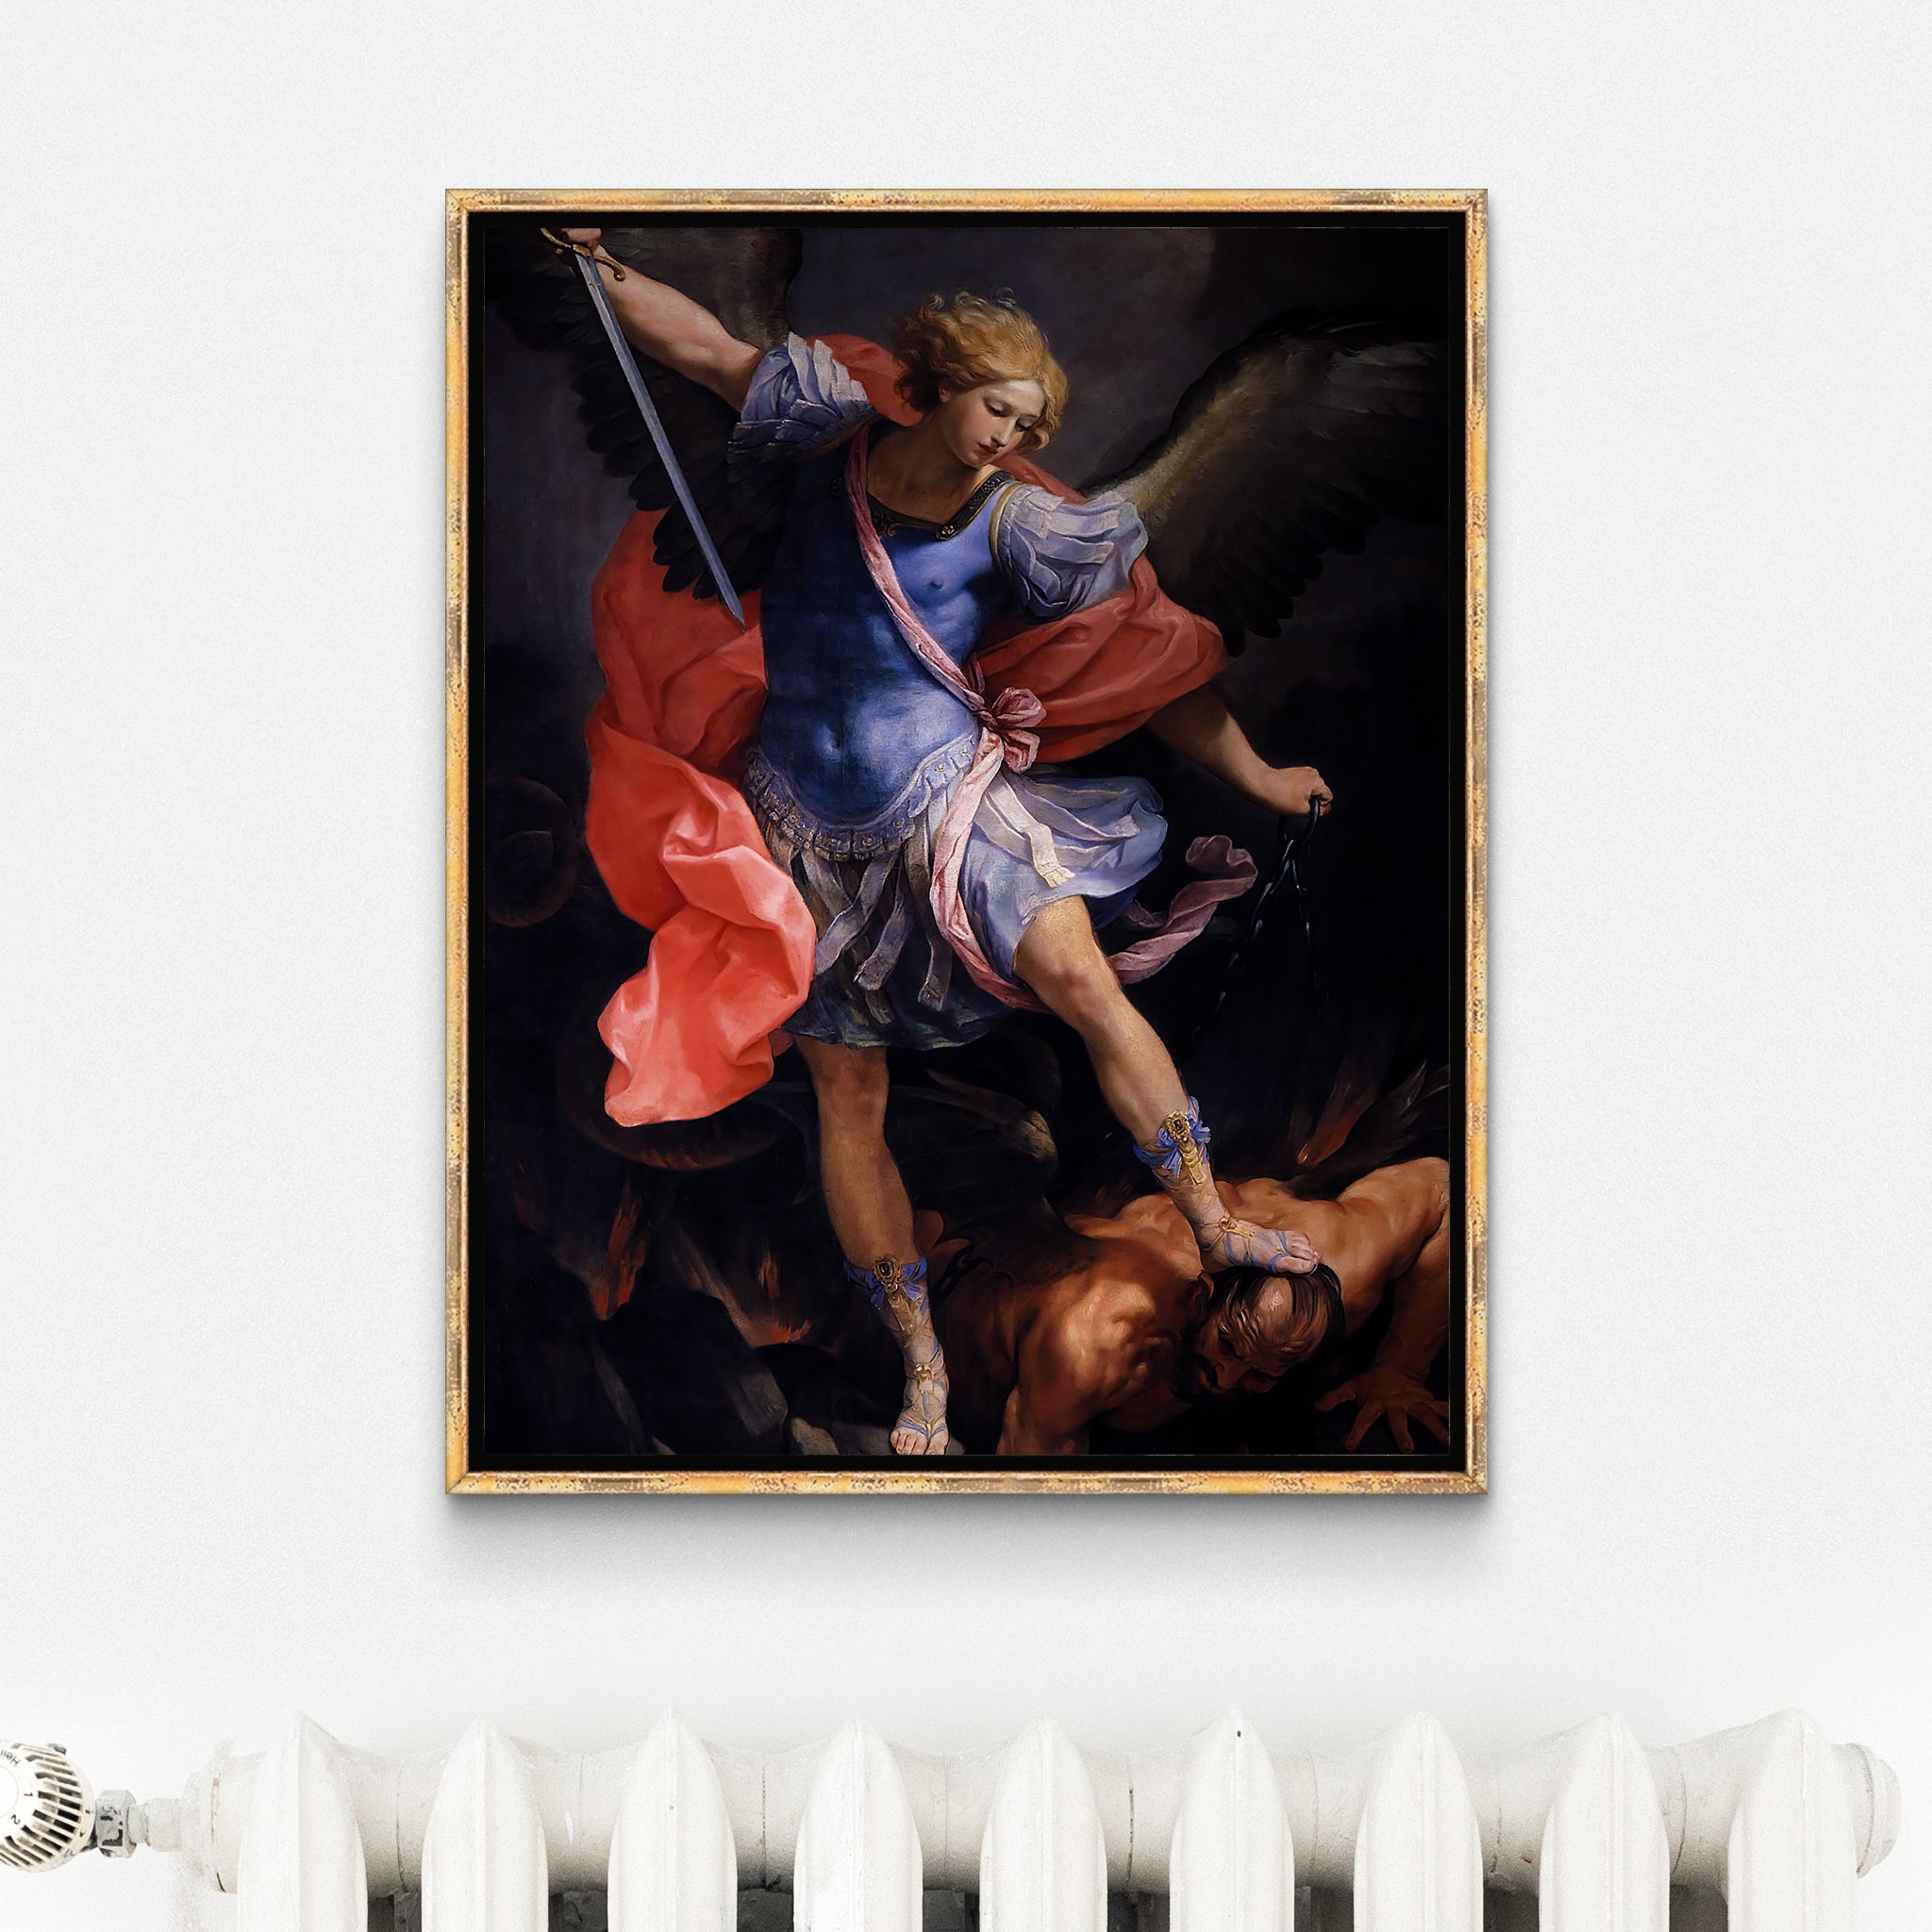 Be inspired by our classic art print Archangel Michael Defeats Satan by Guido Reni. This artwork was printed using the giclée process on archival acid-free paper and is presented in an antique golden frame that captures its timeless beauty in every detail.